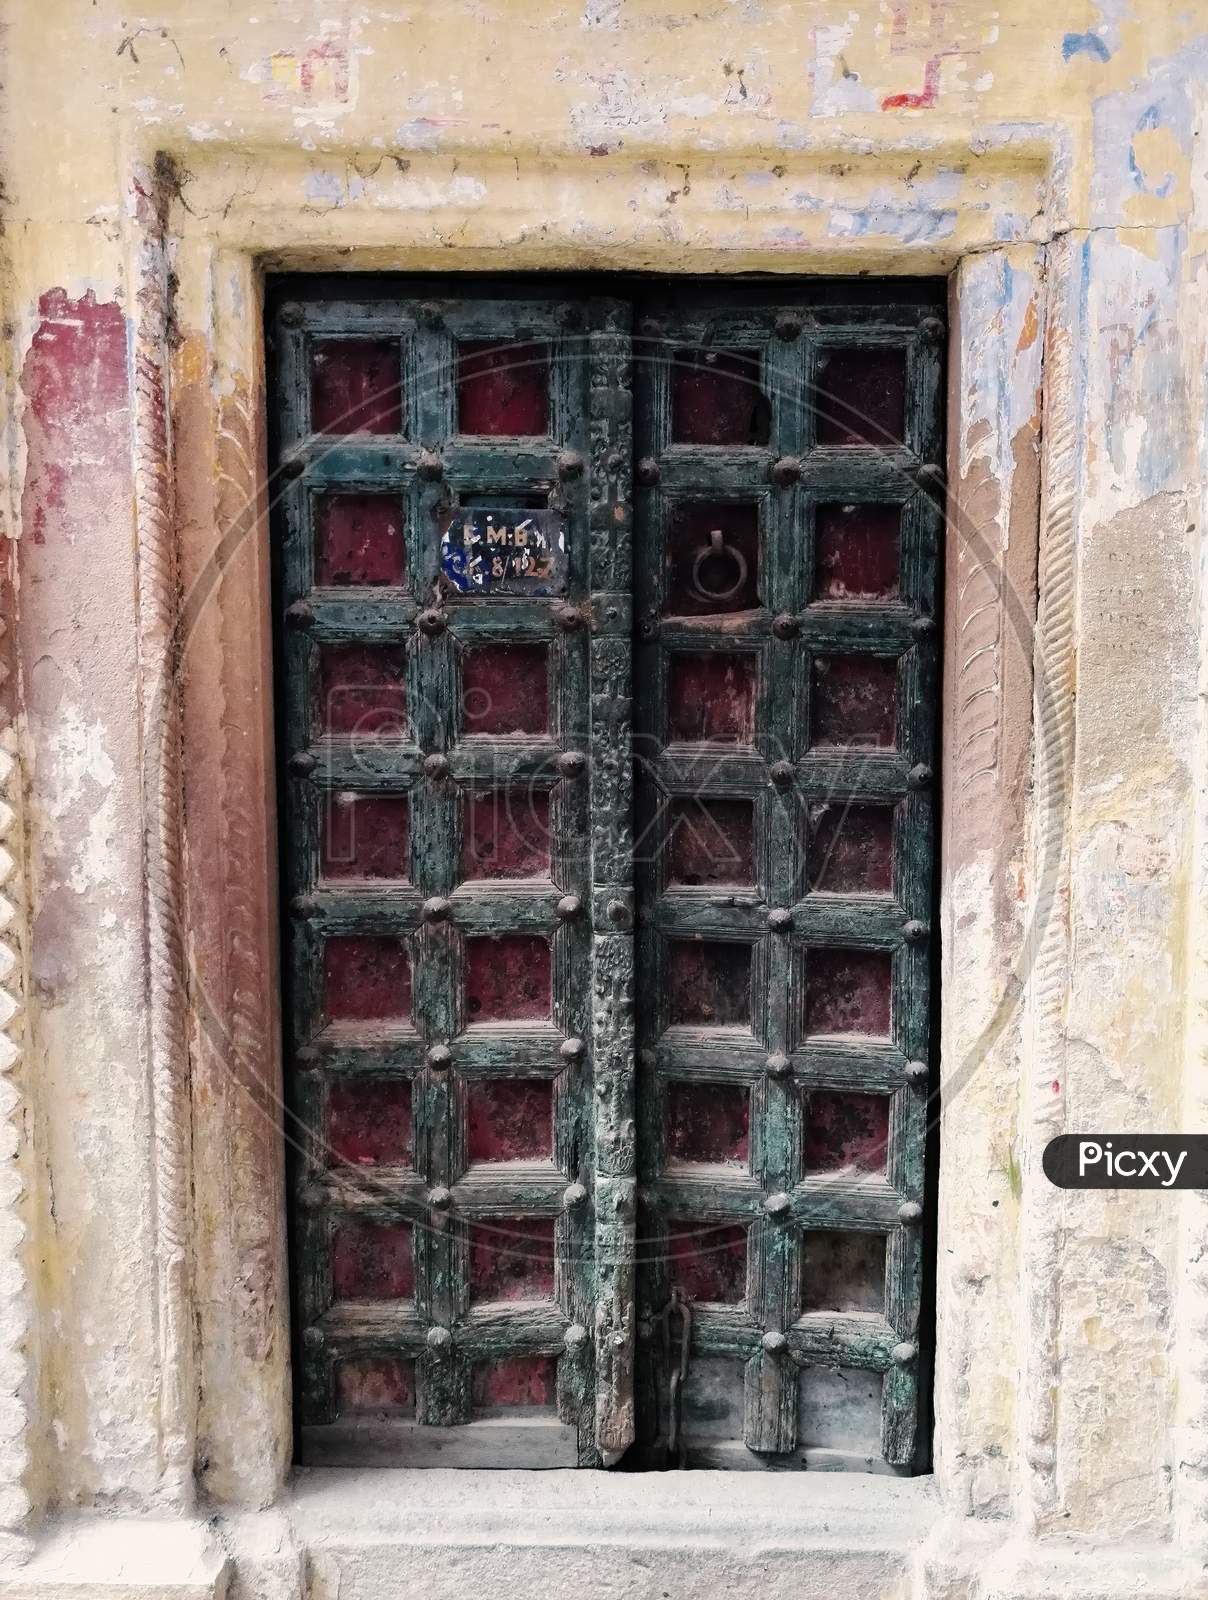 A Decorative Dark Color Door Gate With Square Pattern Design Of Local Residence In Narrow Alley Between Colourful Houses In Varanasi, India.